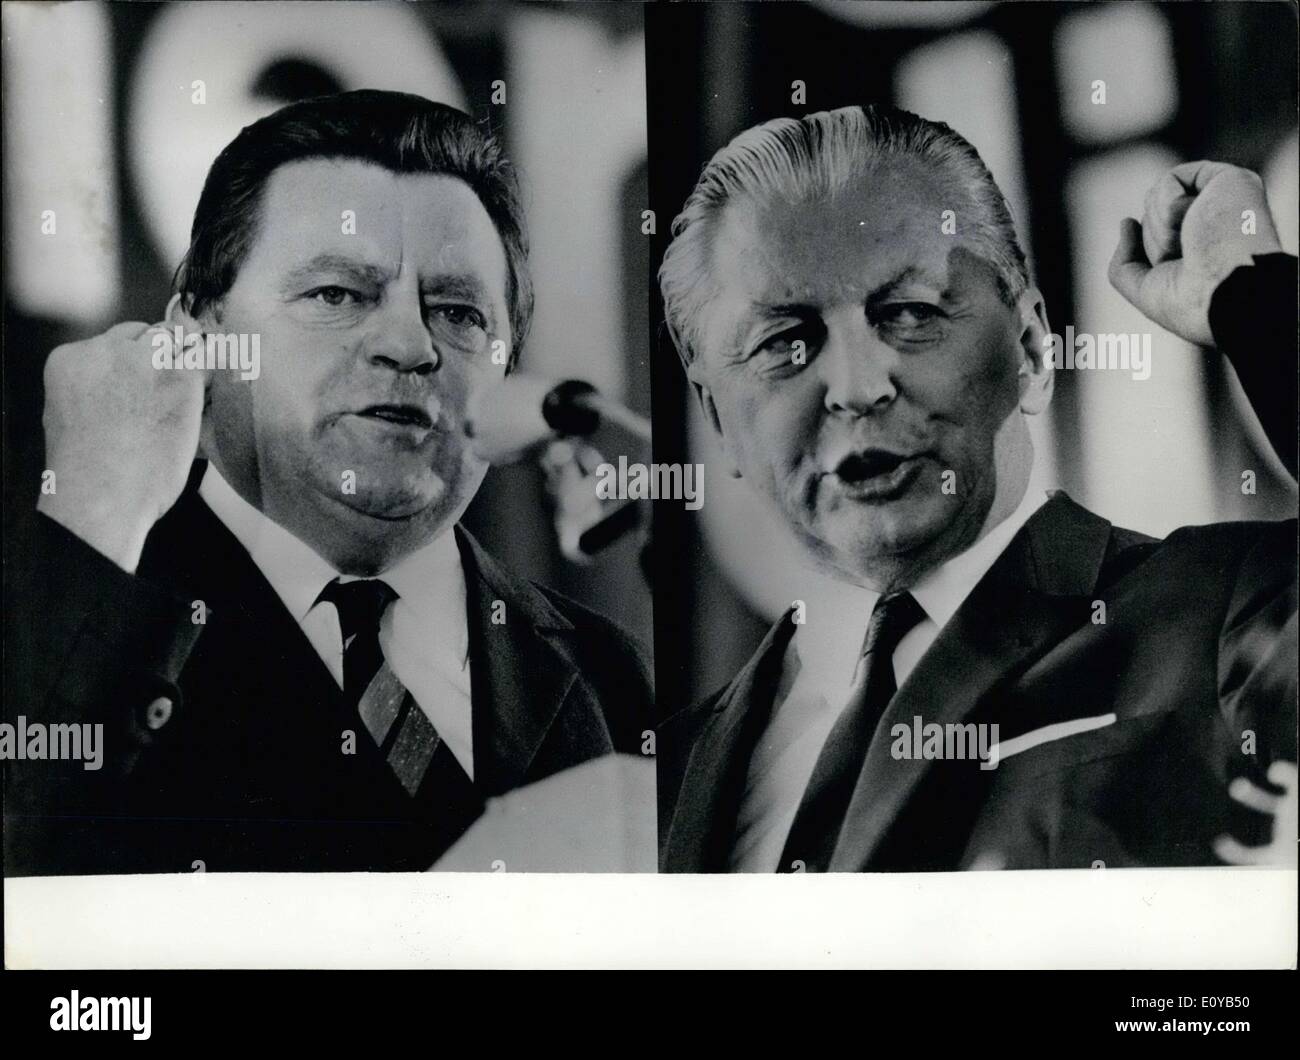 Jul. 16, 1969 - Election in Germany. The German parties began their fight on September 28, 1969. Election meetings are currently occurring in most of the major German cities. In those meetings the top officials of each of the parties, like Chancellor Kiesinger, Finance Minister Franz Josef Strauss, and SPD-chairman Willy Brandt put forth their programs. The NPD is trying this time to be successful in obtaining seats in the Bundestag. The CDU/CSU have emerged in the strongest position Stock Photo